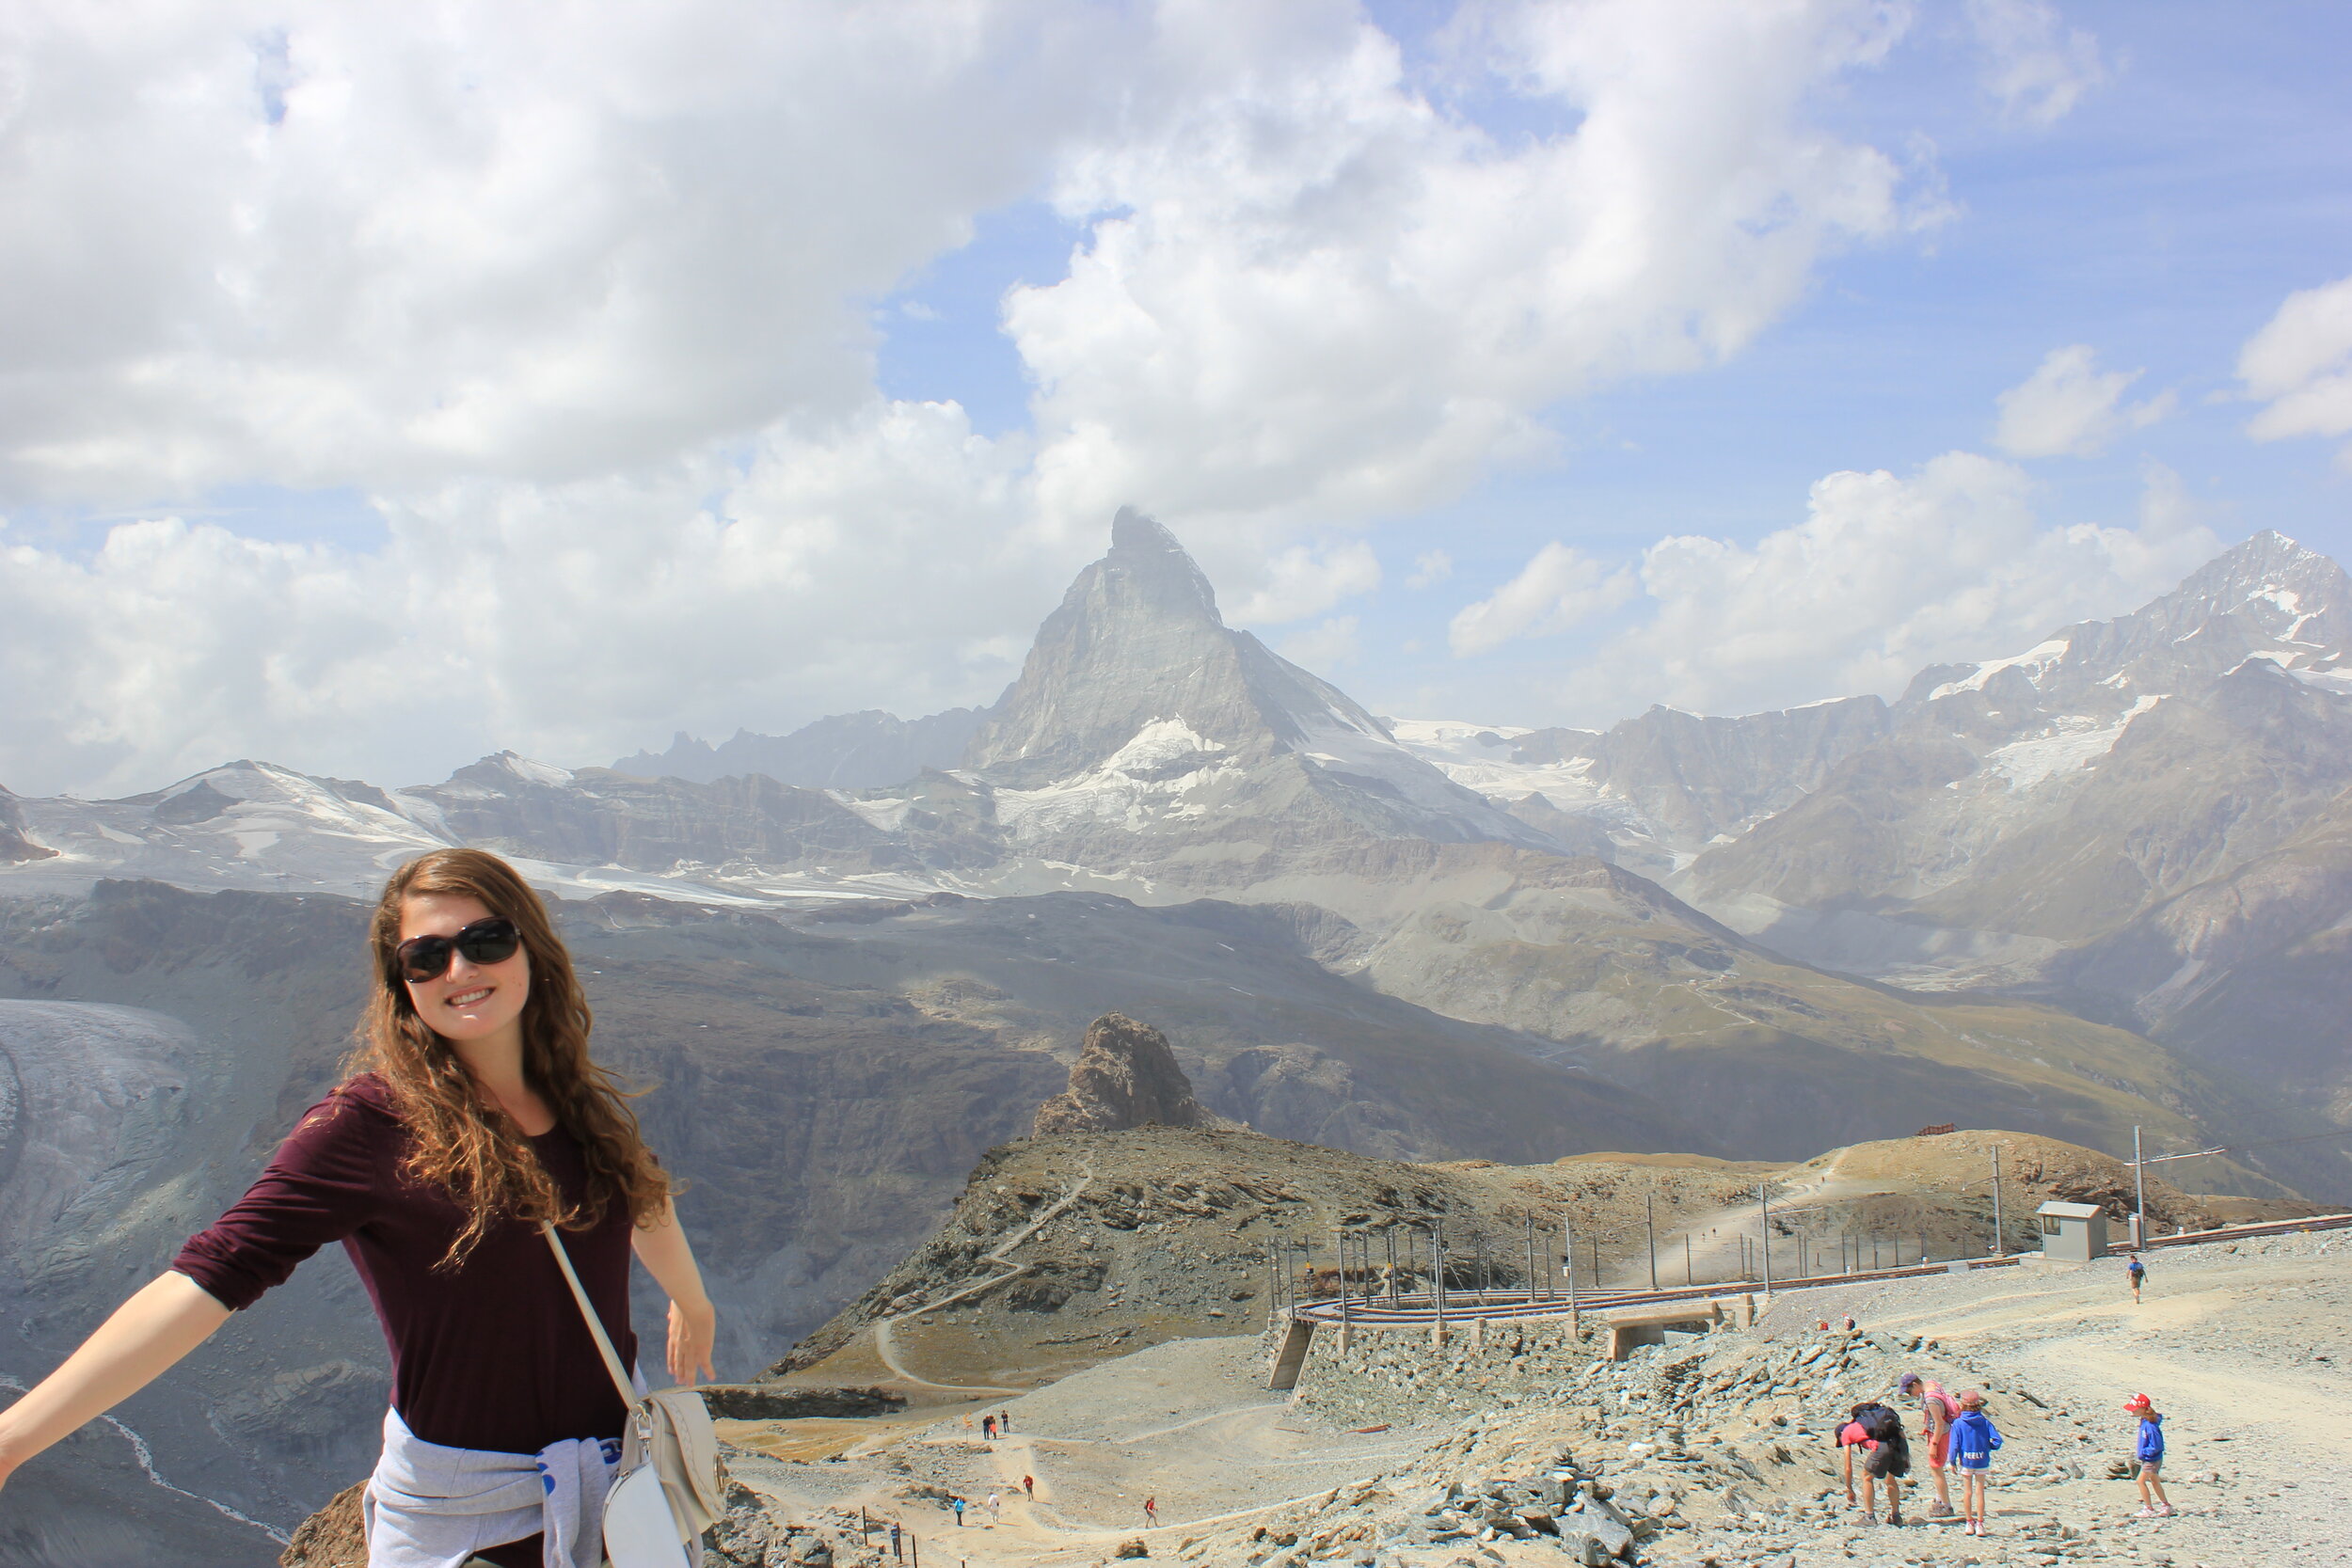  Me as a 19-year-old in Switzerland (that’s the Matterhorn in the background!) 